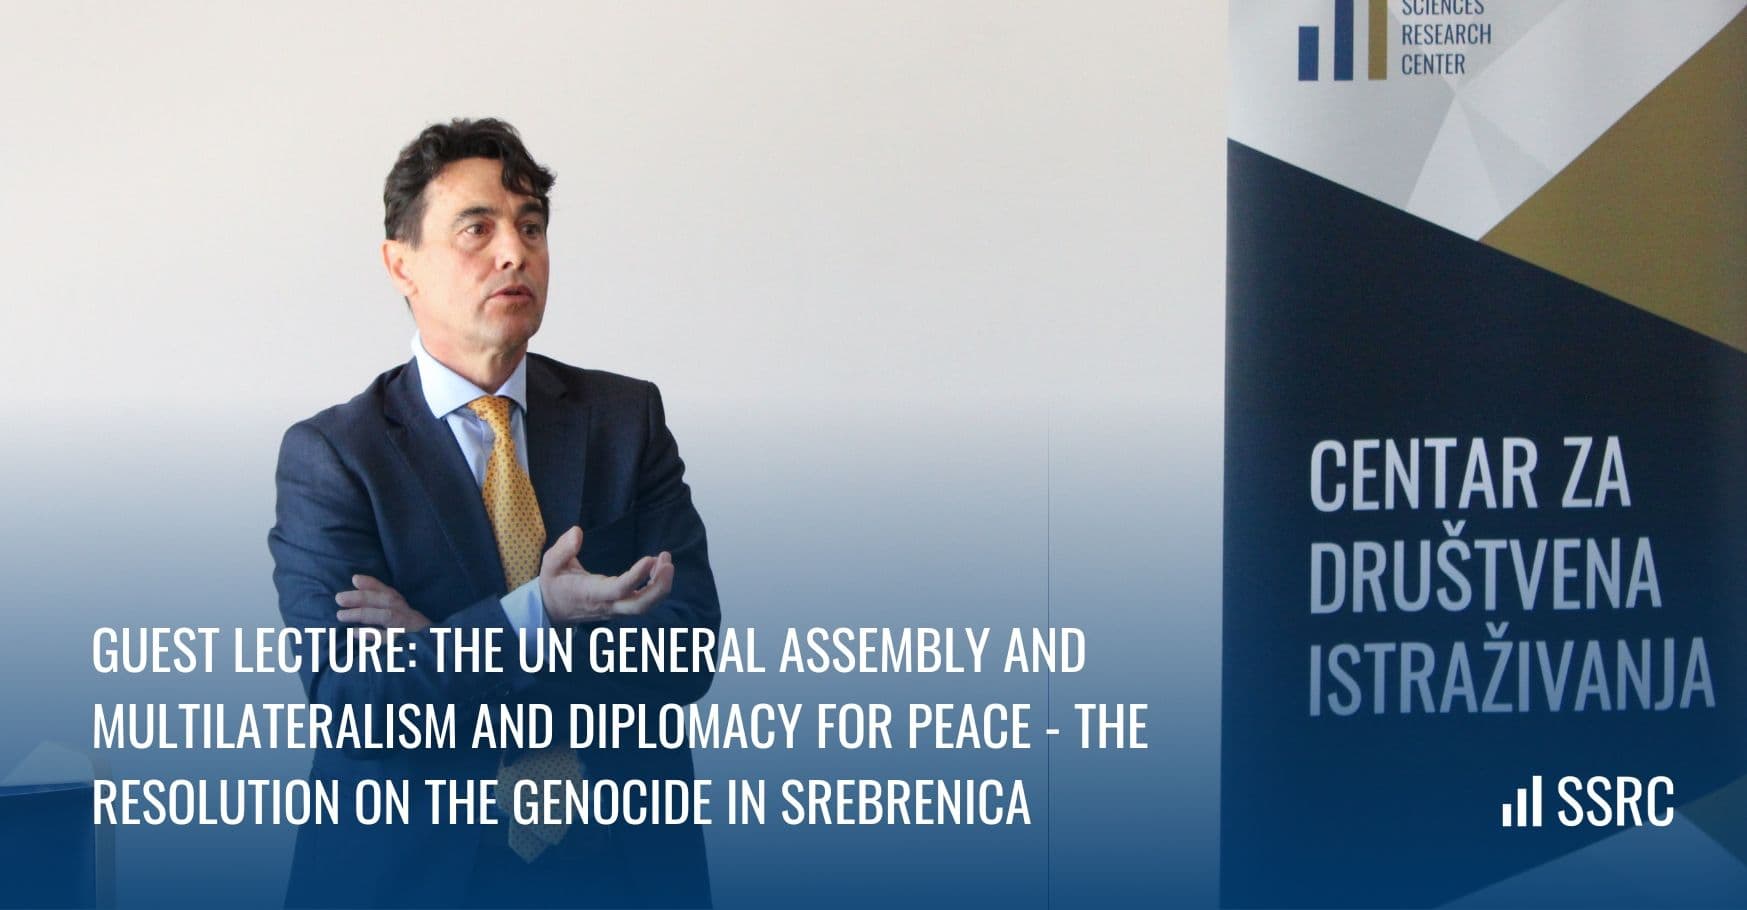 Discussion with Dr. Kožljak on the Role of the UNGA in Multilateralism and Diplomacy for Peace in the Context of the Resolution on the Genocide in Srebrenica